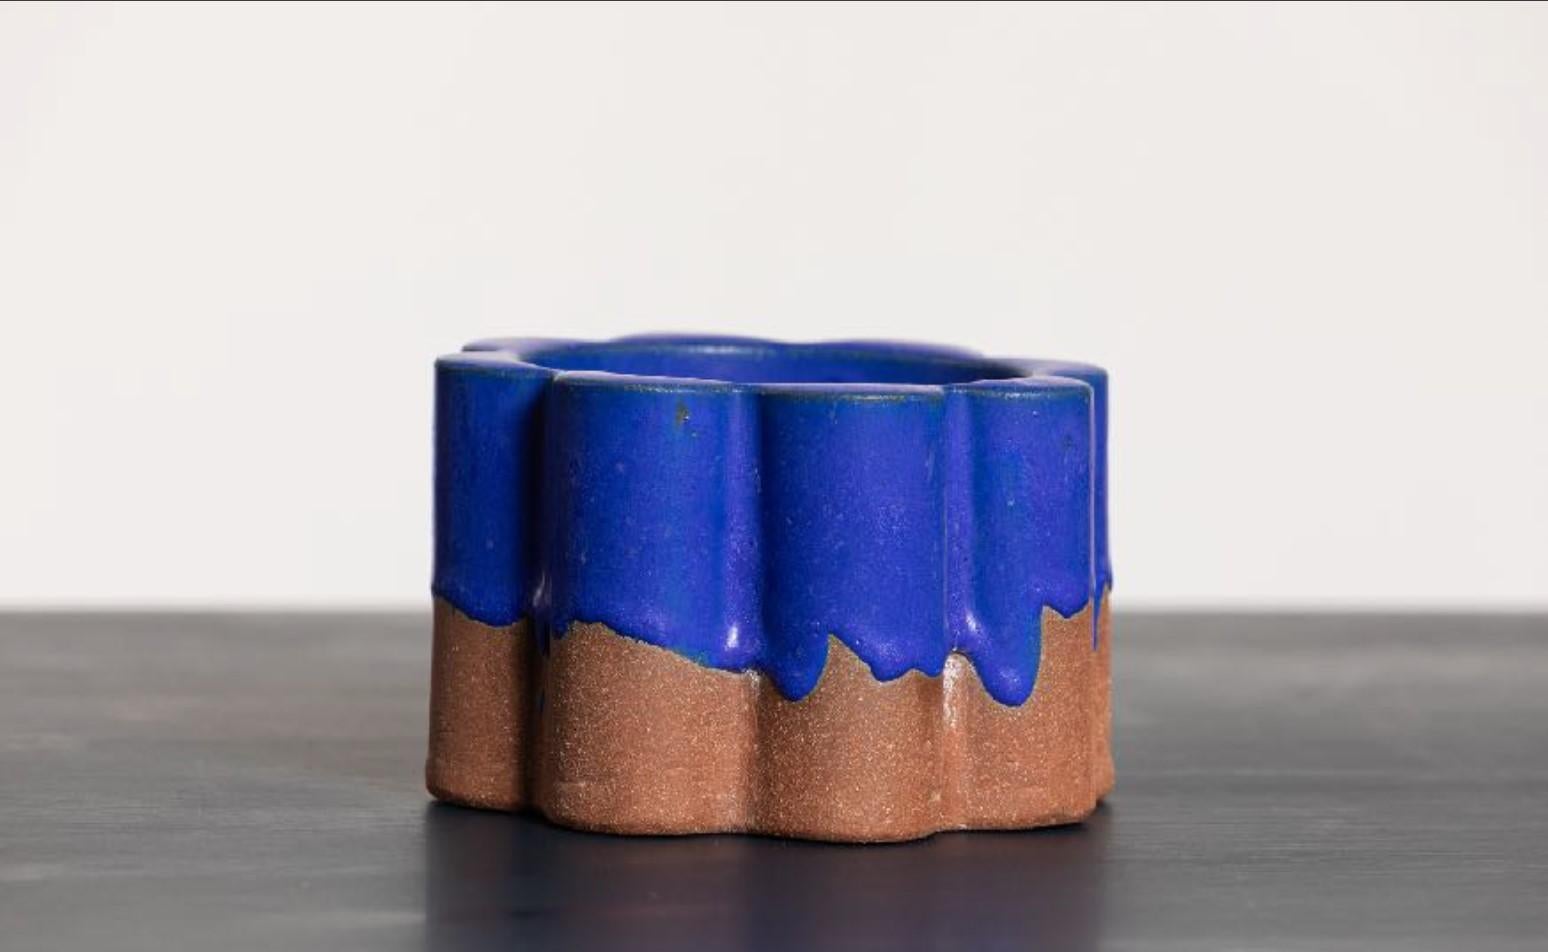 Soy candle inno(s)cent - blue by Milan Pekar, Amansoycandles
Dimensions: 15x15x7 cm
Materials: Ceramic

Handmade in the Czech Republic. 
Also available in different colors.

The scent of Incense (K. Vavrova) is inspired by the Italian way of